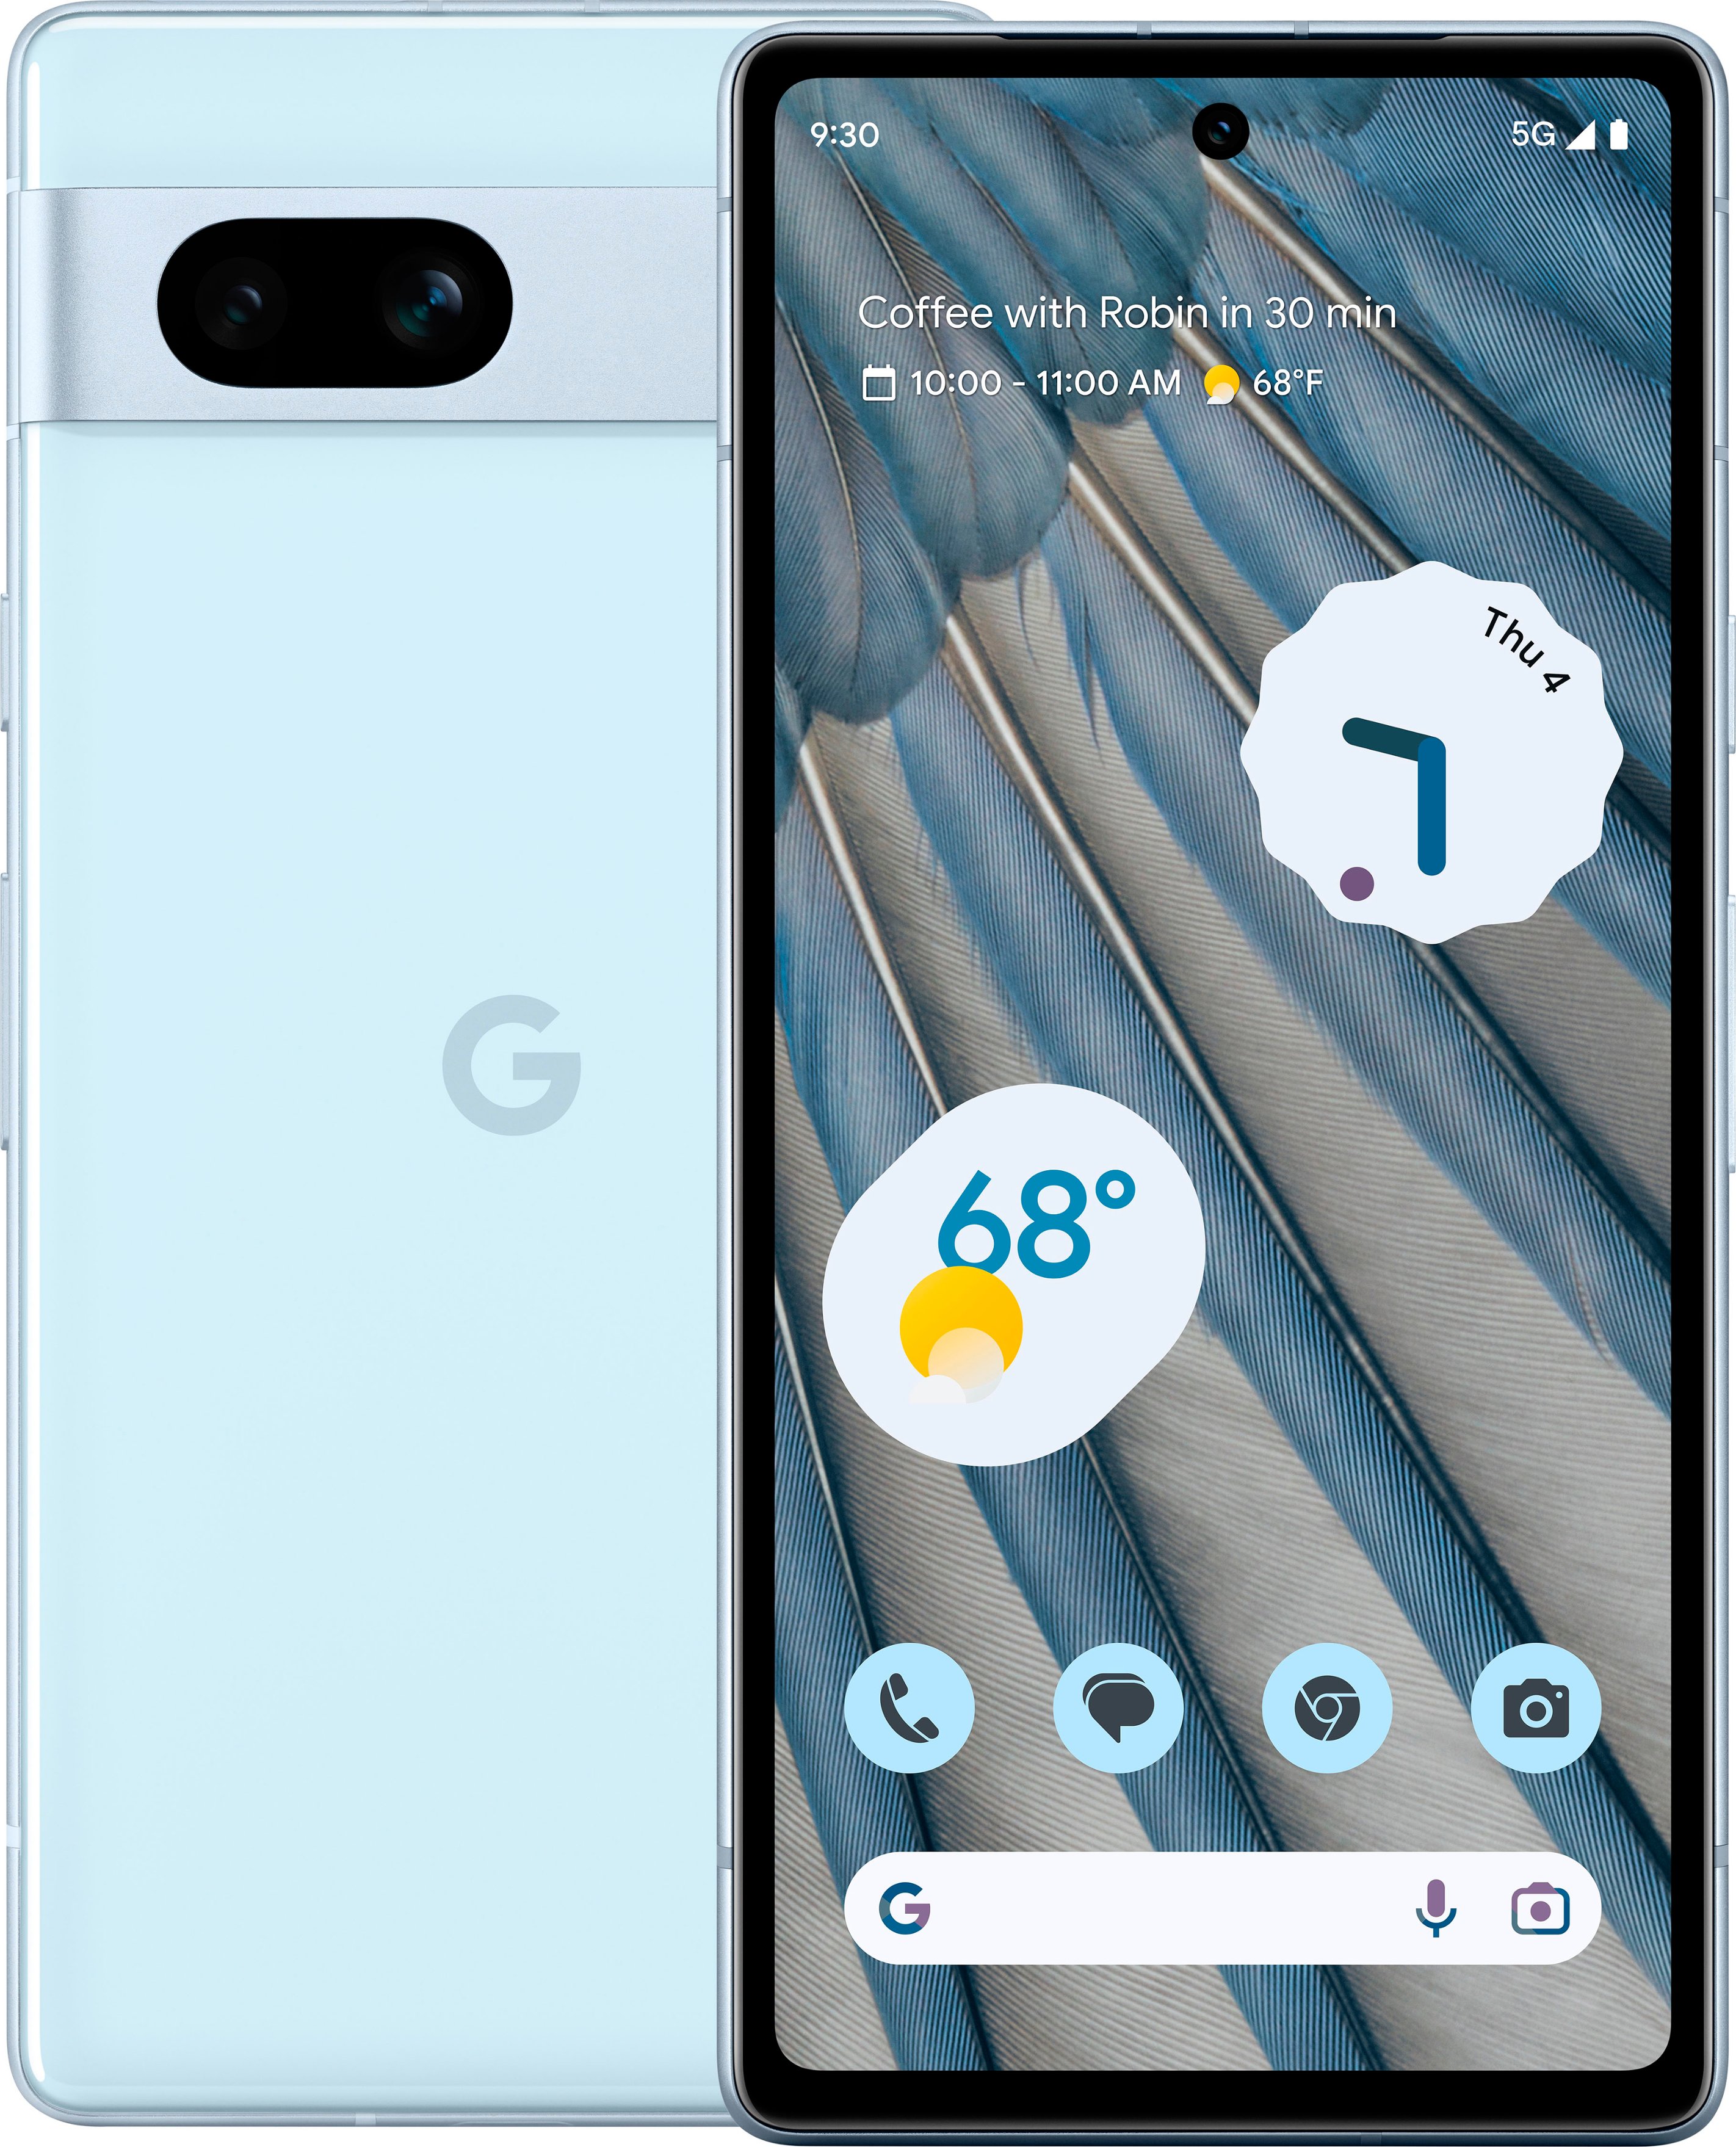 Pixel Perfect Price! Google Pixel 7a Now Just $349 (30% OFF!)